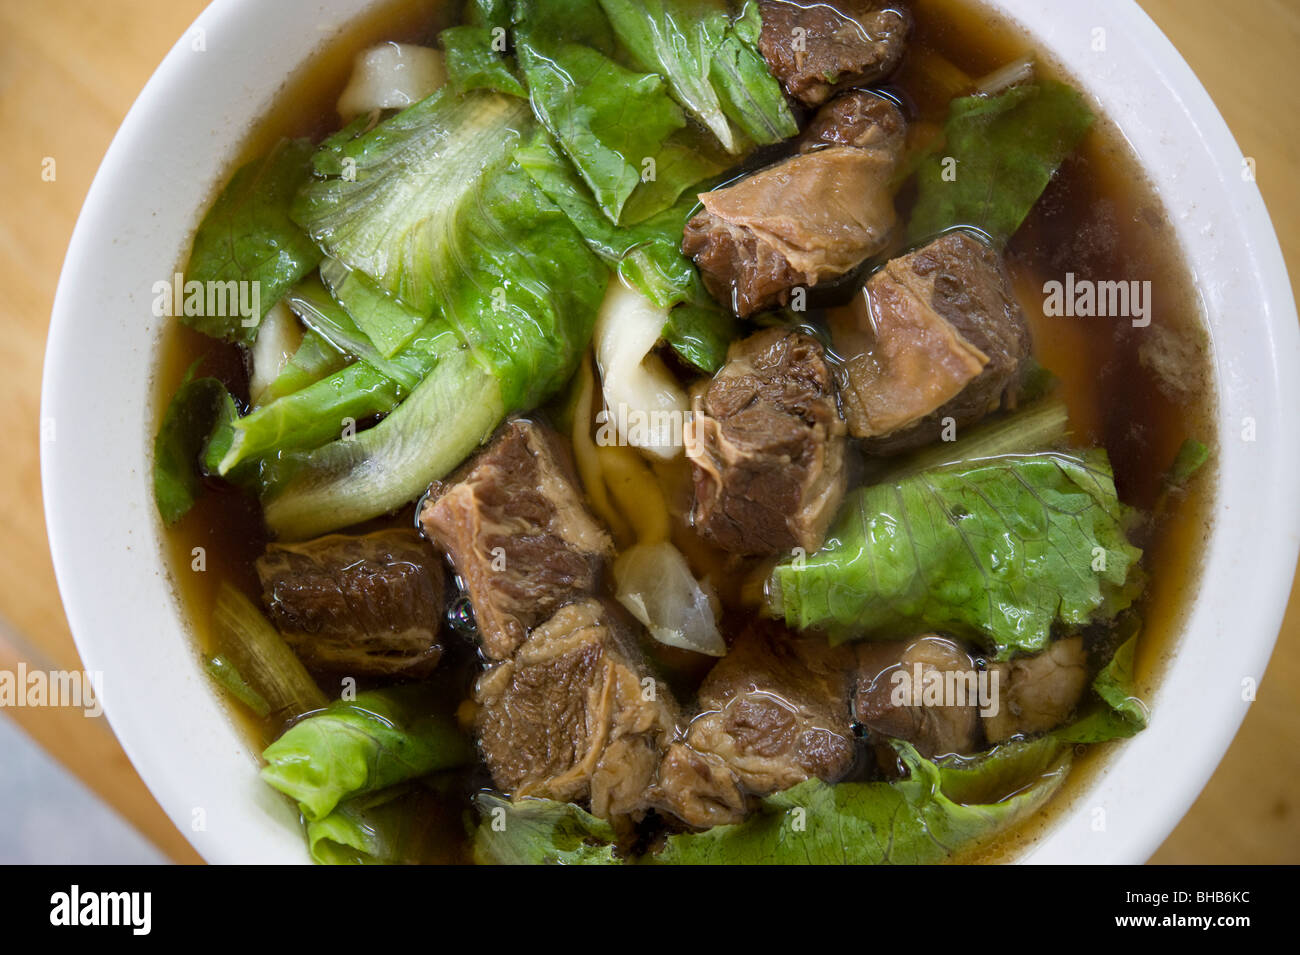 Taiwanese beef and noodle soup, garnished with lettuce and chunks of braised beef, Taipei, Taiwan. Stock Photo